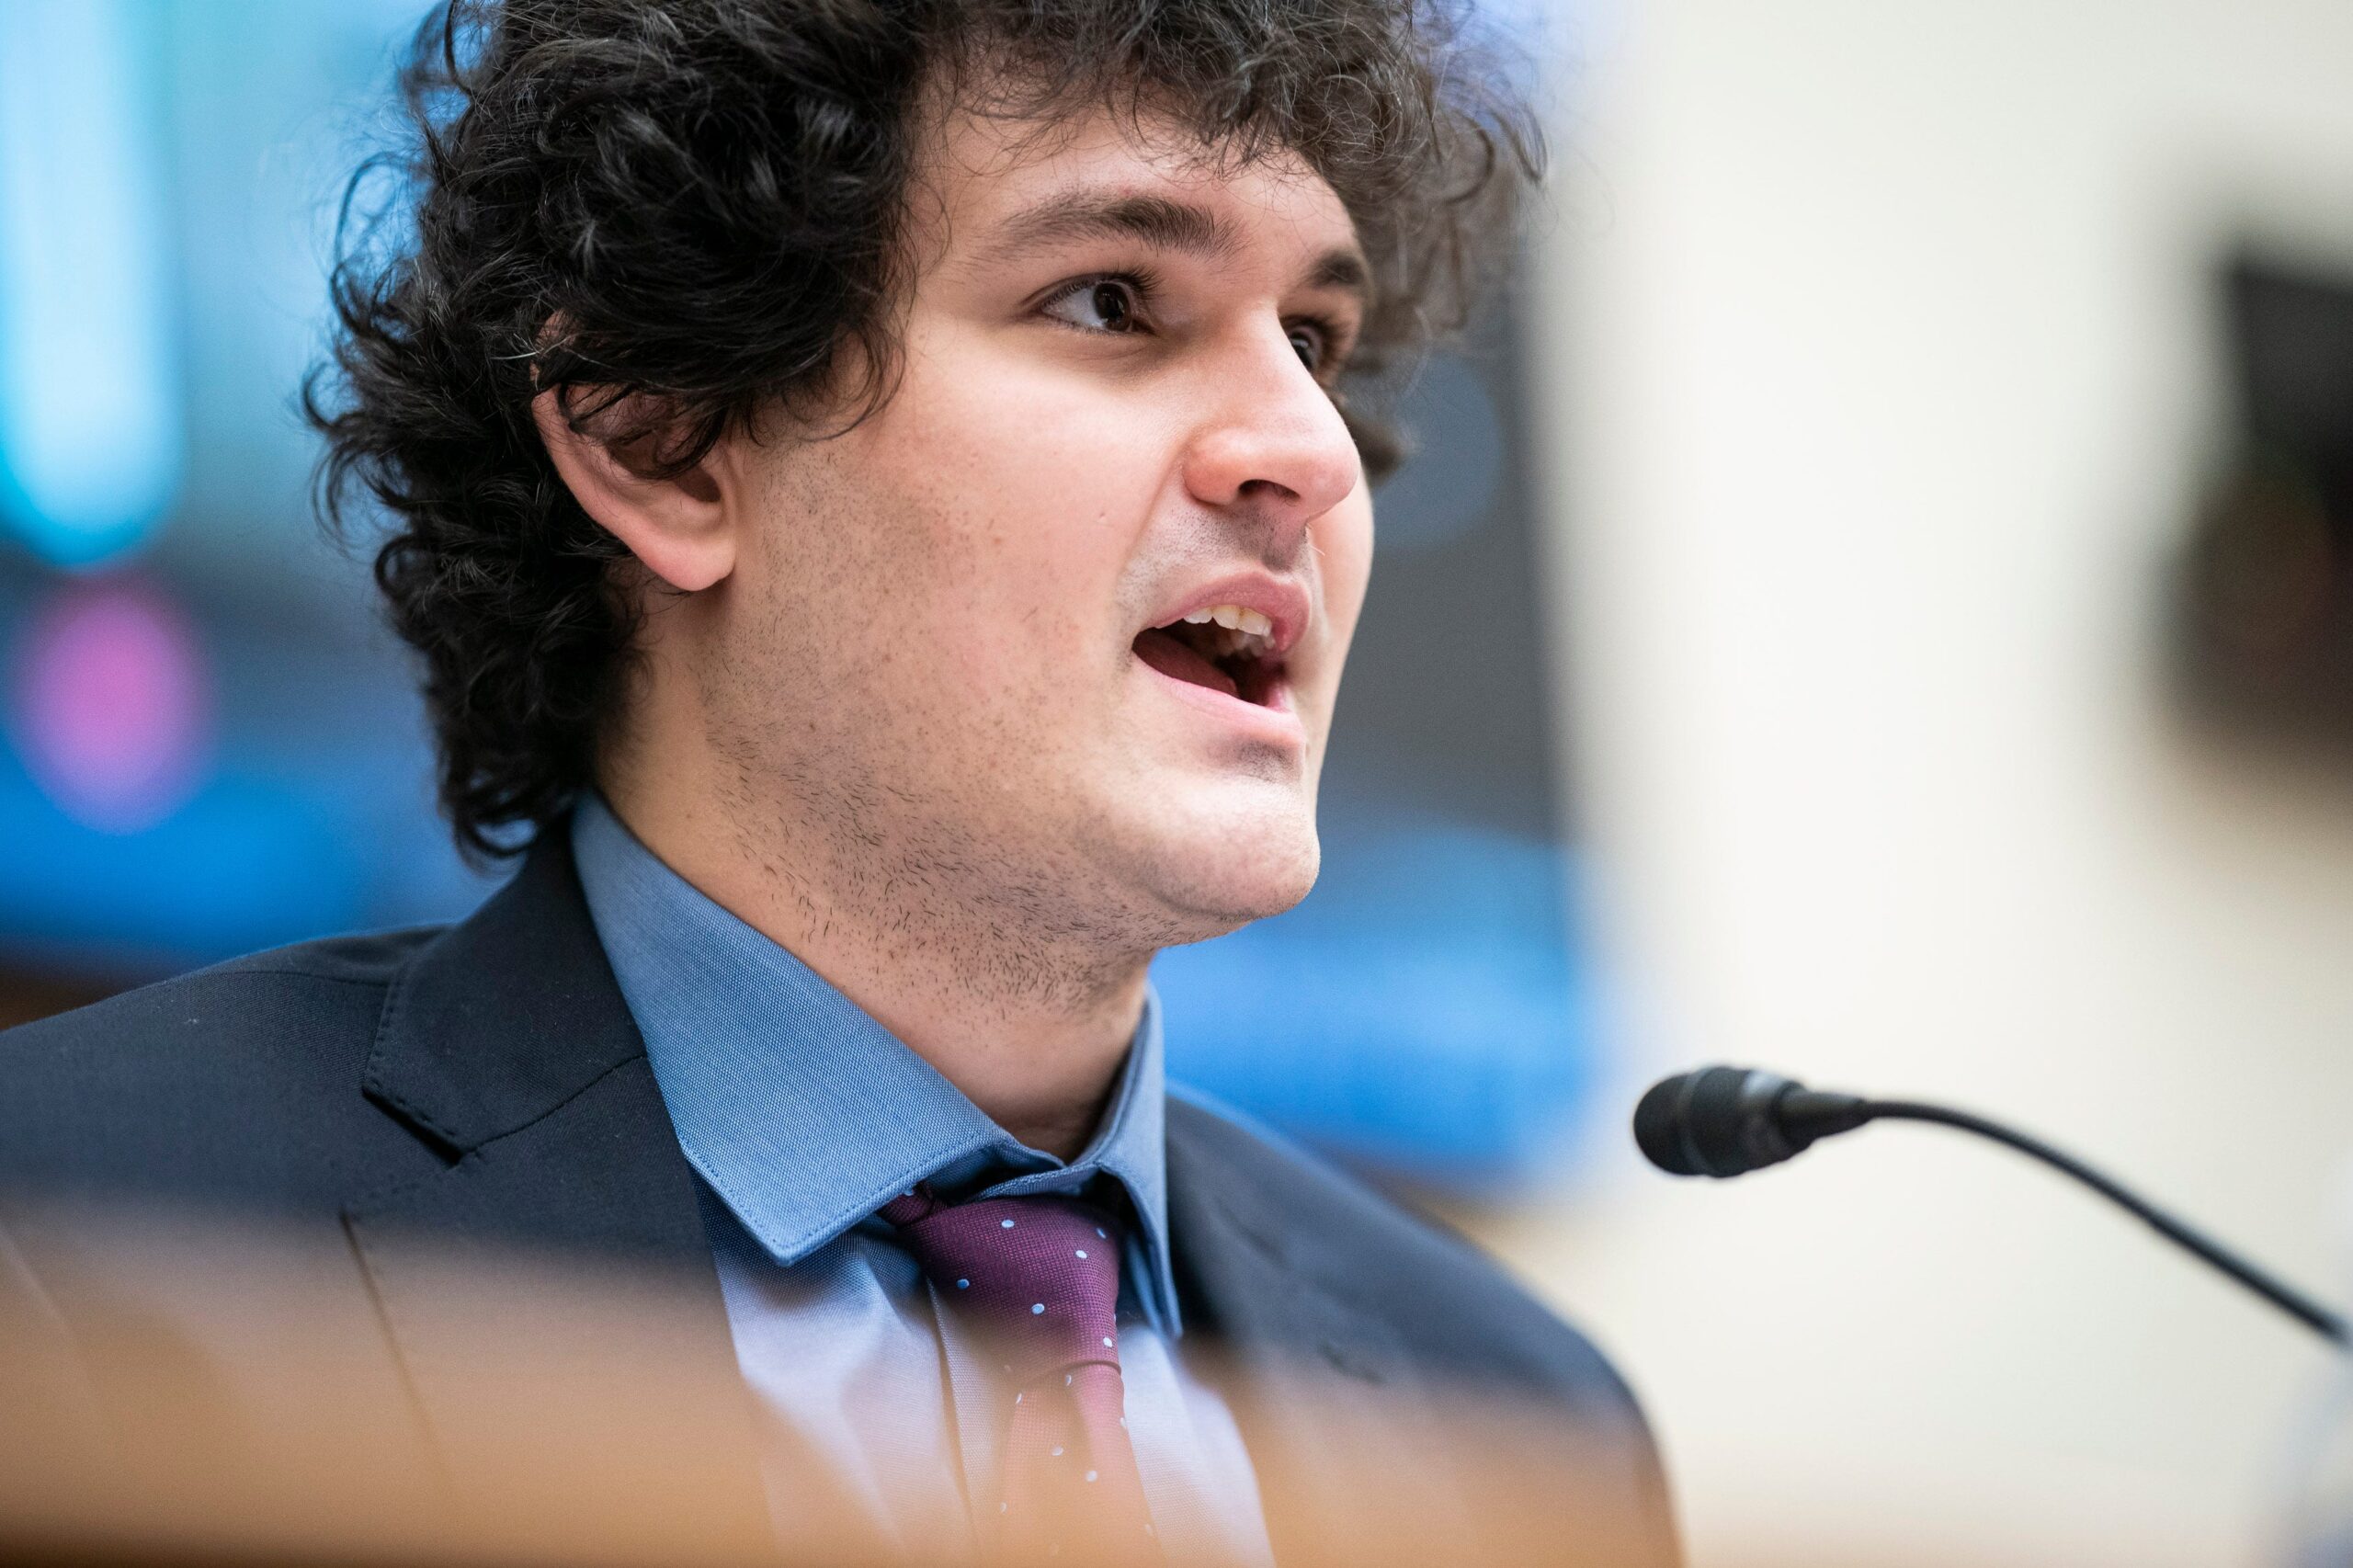 Sam Bankman-Fried, FTX CEO, at a digital assets hearing on Capitol Hill